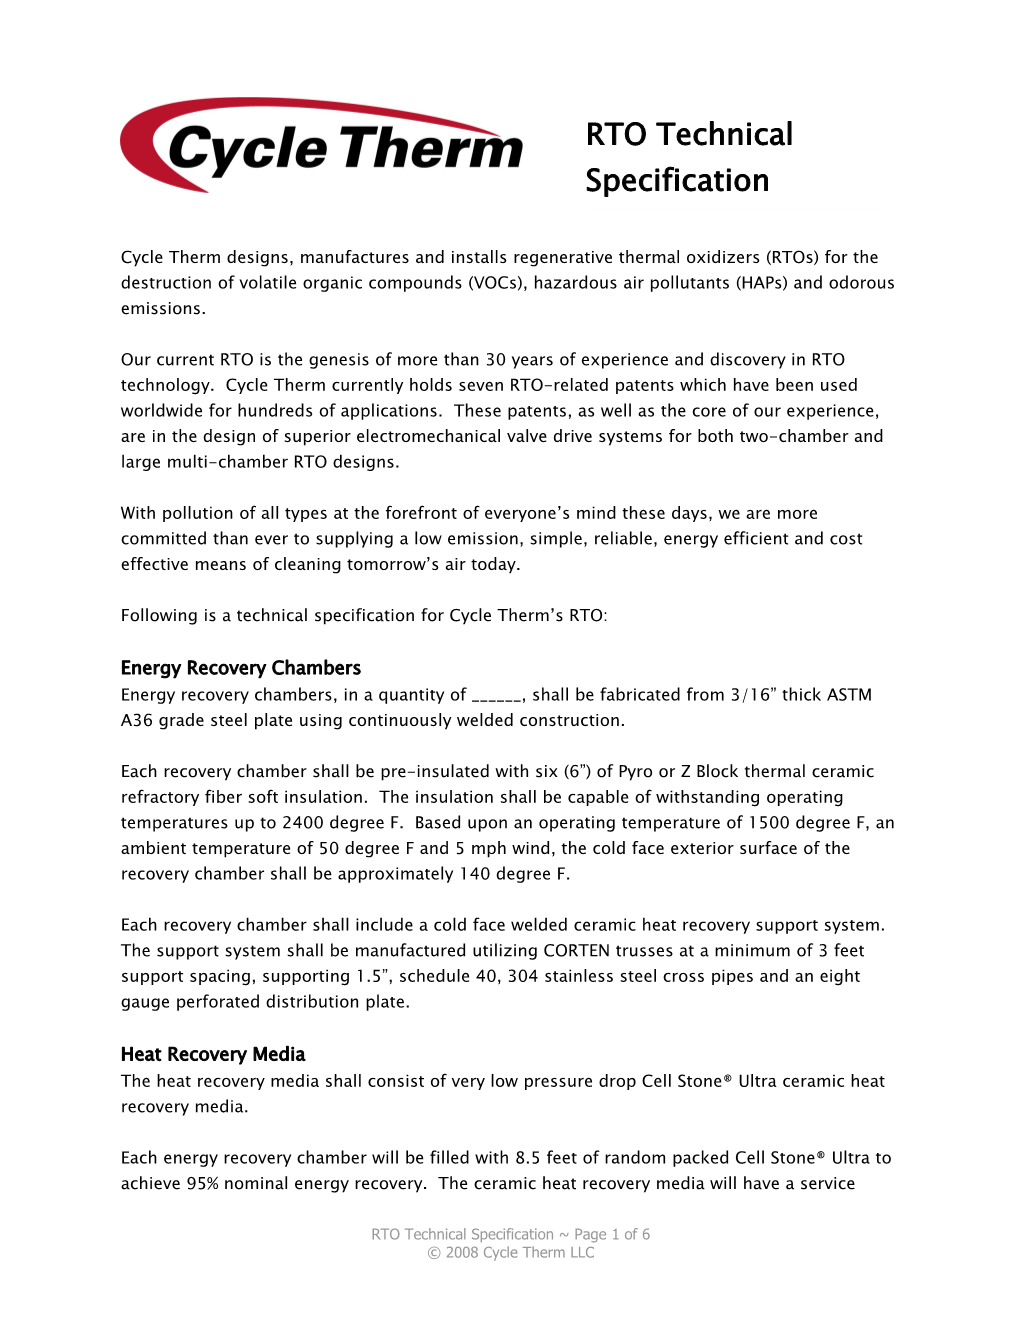 Following Is a Technical Specification for Cycle Therm S RTO